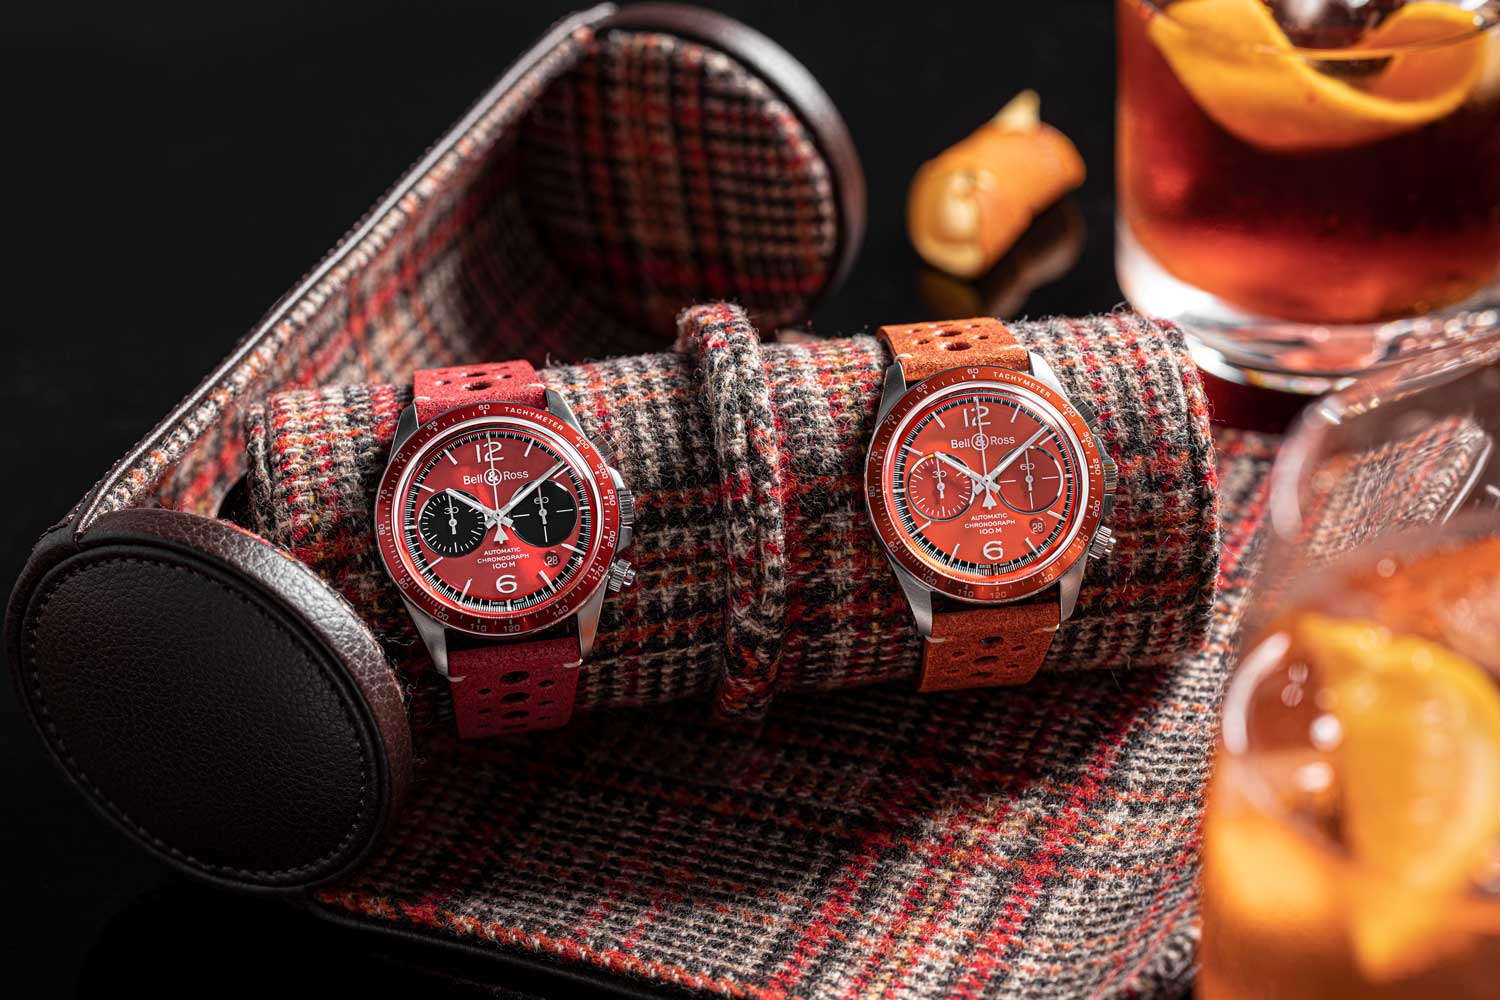 The watches come with a WM Brown X WOLF Watch Roll, crafted in classic smooth brown leather and lined with a Negroni tweed. The roll features WOLF’s patented Watch Guards to keep your timepieces protected. (©Revolution)